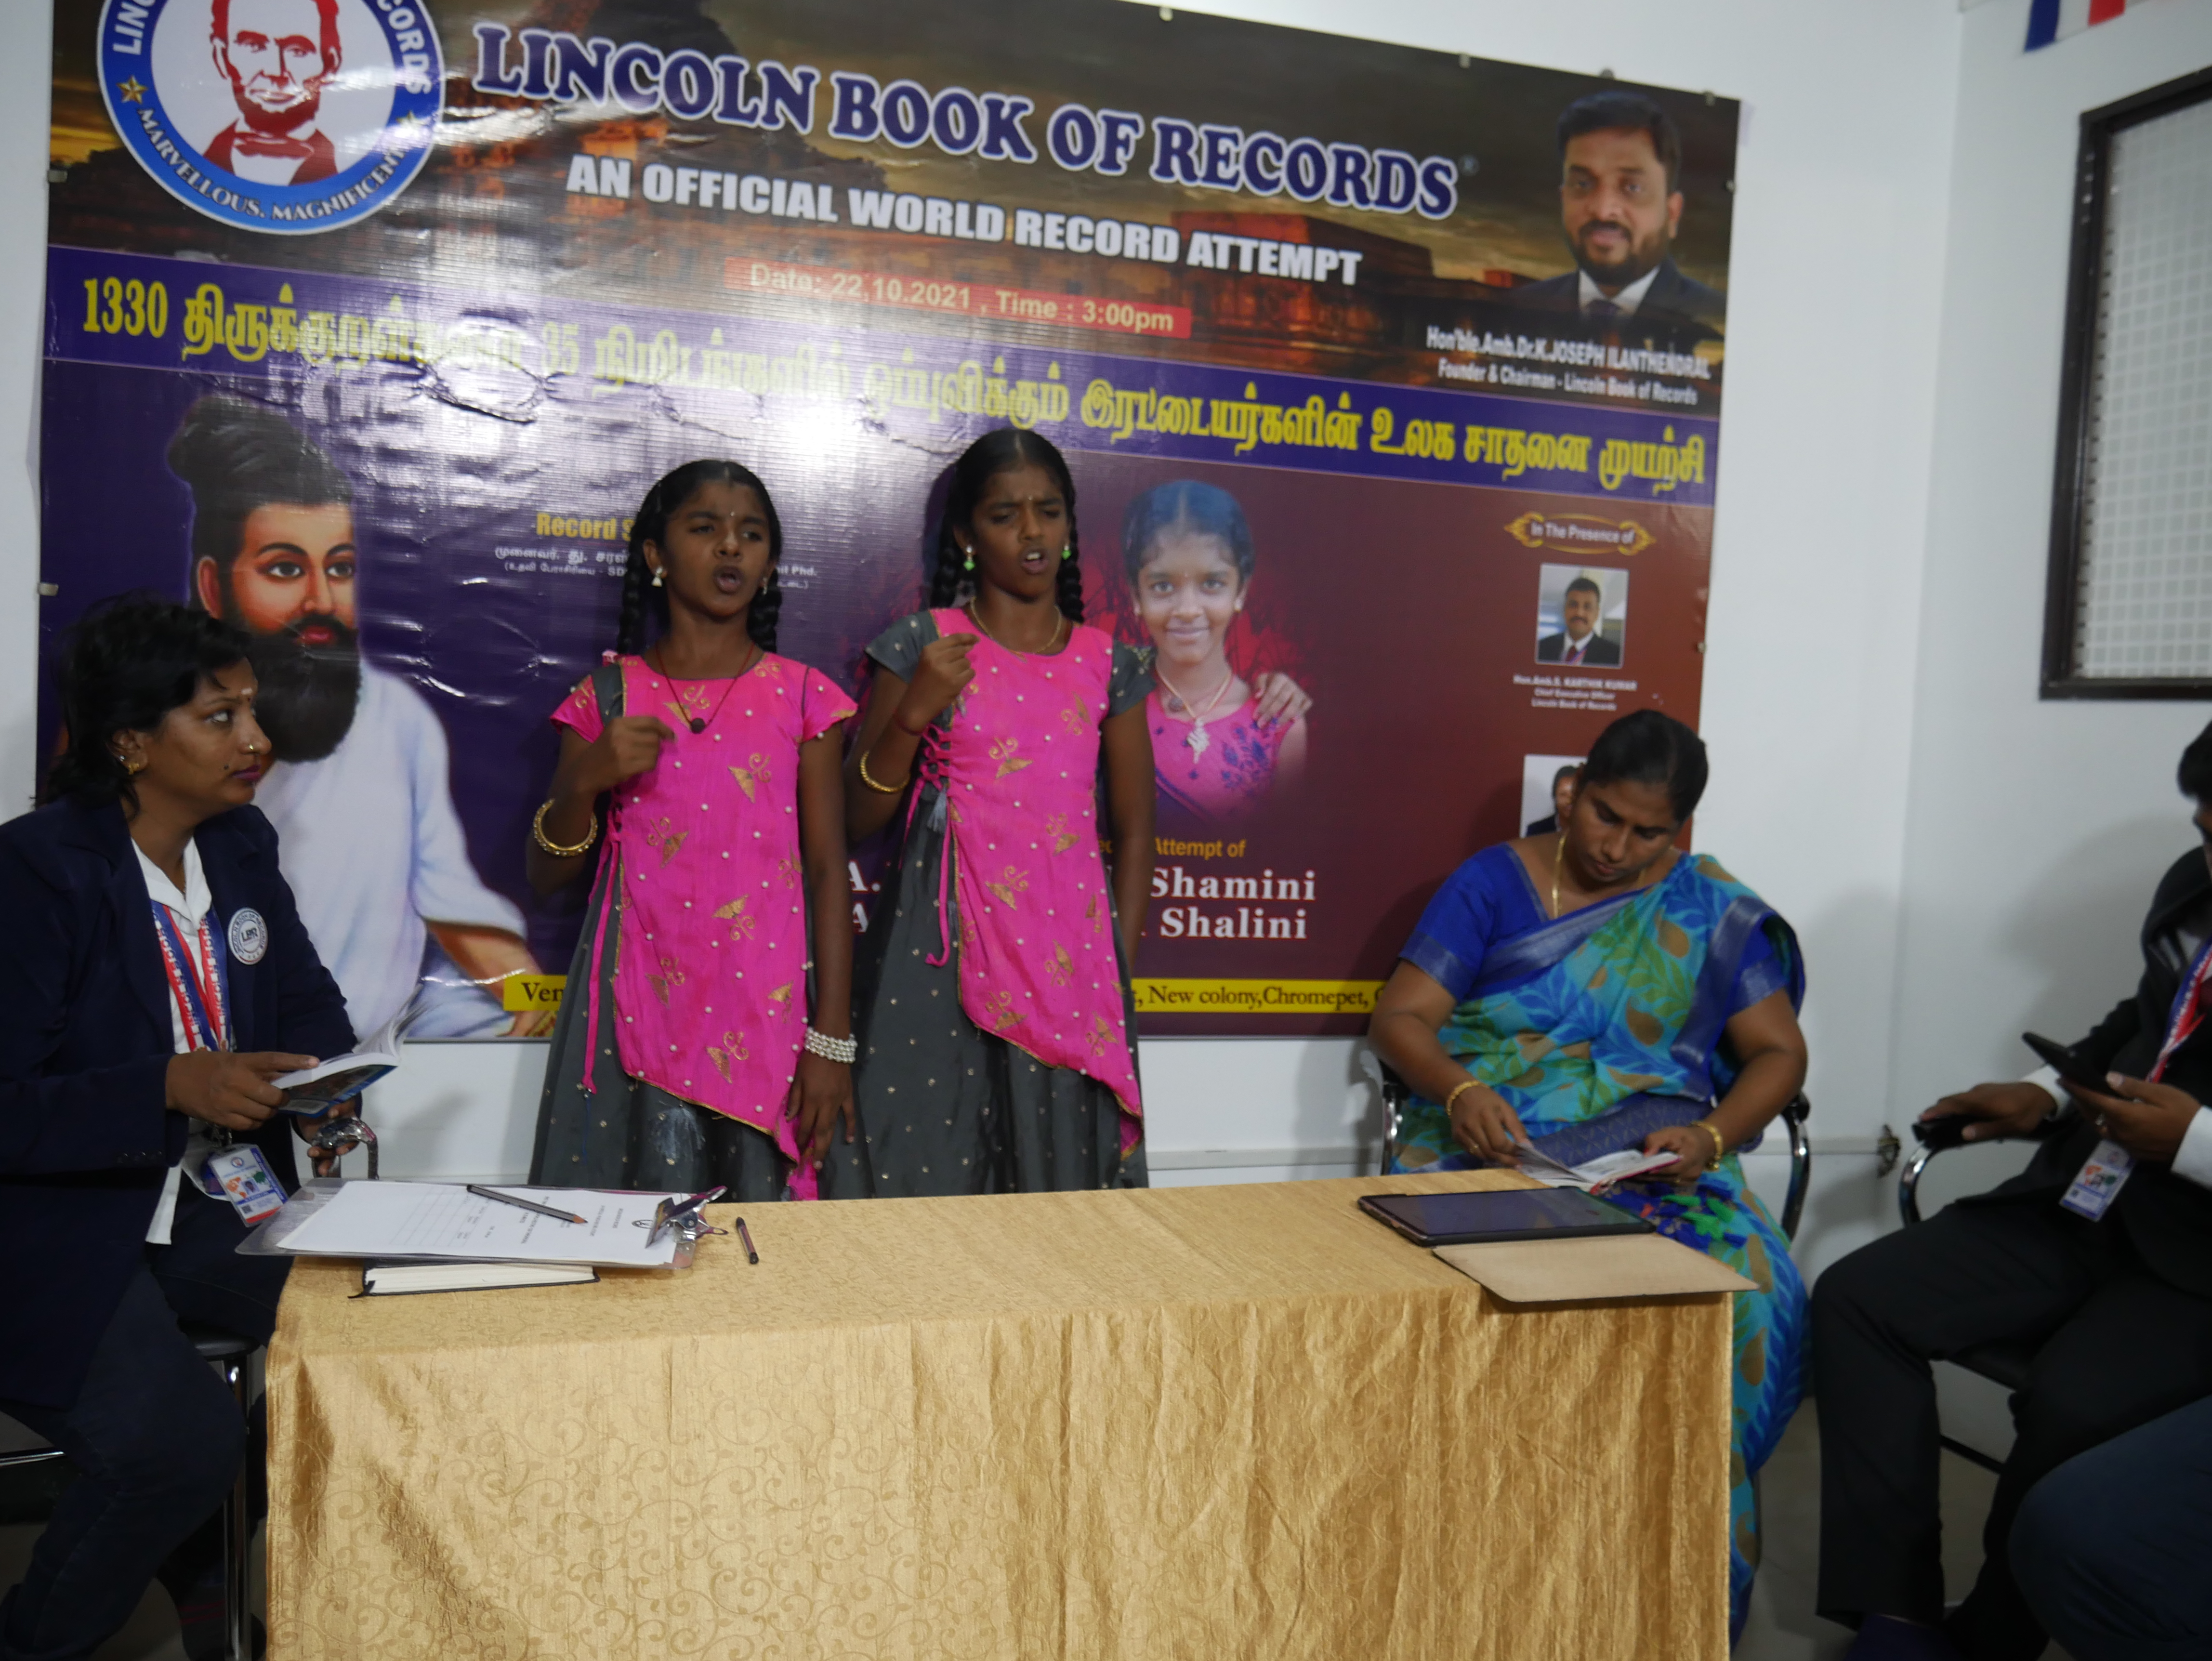 FIRST TWIN KIDS IN THE WORLD RECITING 1330 THIRUKKURAL IN 35 MINUTES